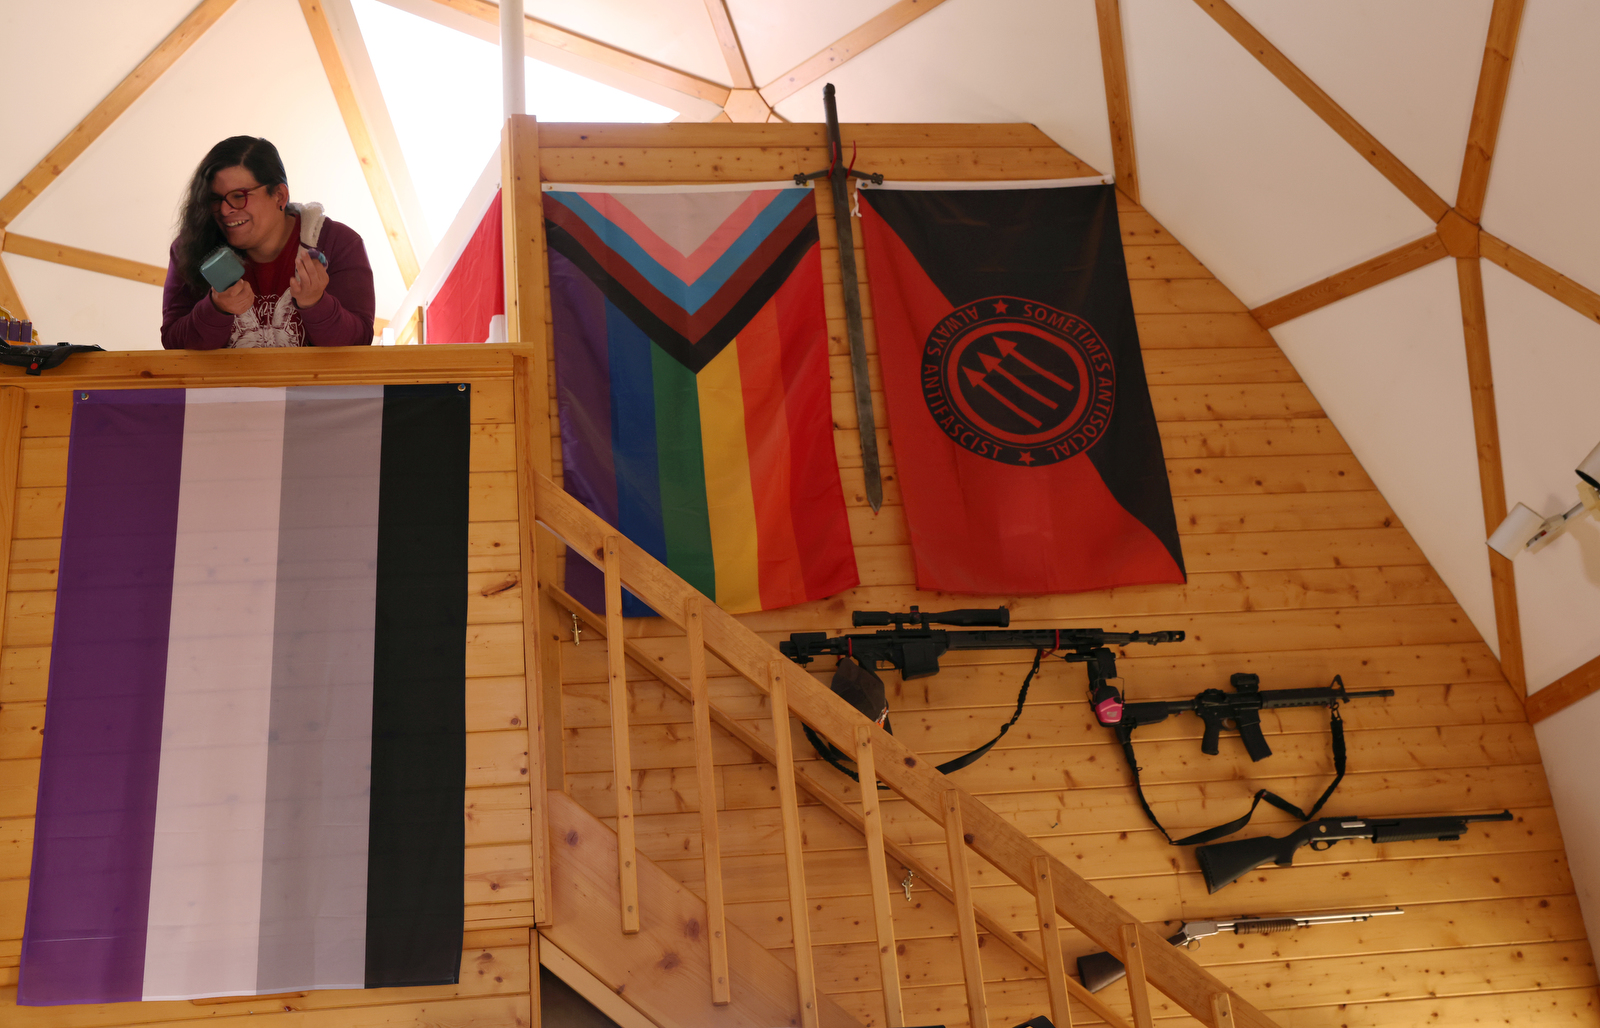 Bonnie Nelson chats with people as Nelson stands above the asexual flag as it hangs with several other flags representing gender and sexual identity at the Tenacious Unicorn Ranch in Westcliffe, Colorado. Above four mounted rifles, a red-and-black flag can be seen that says, “Sometimes antisocial, always antifascist,” with the three arrows of the Iron Front, a World War II-era German paramilitary anti-Nazi, antifascist organization. 